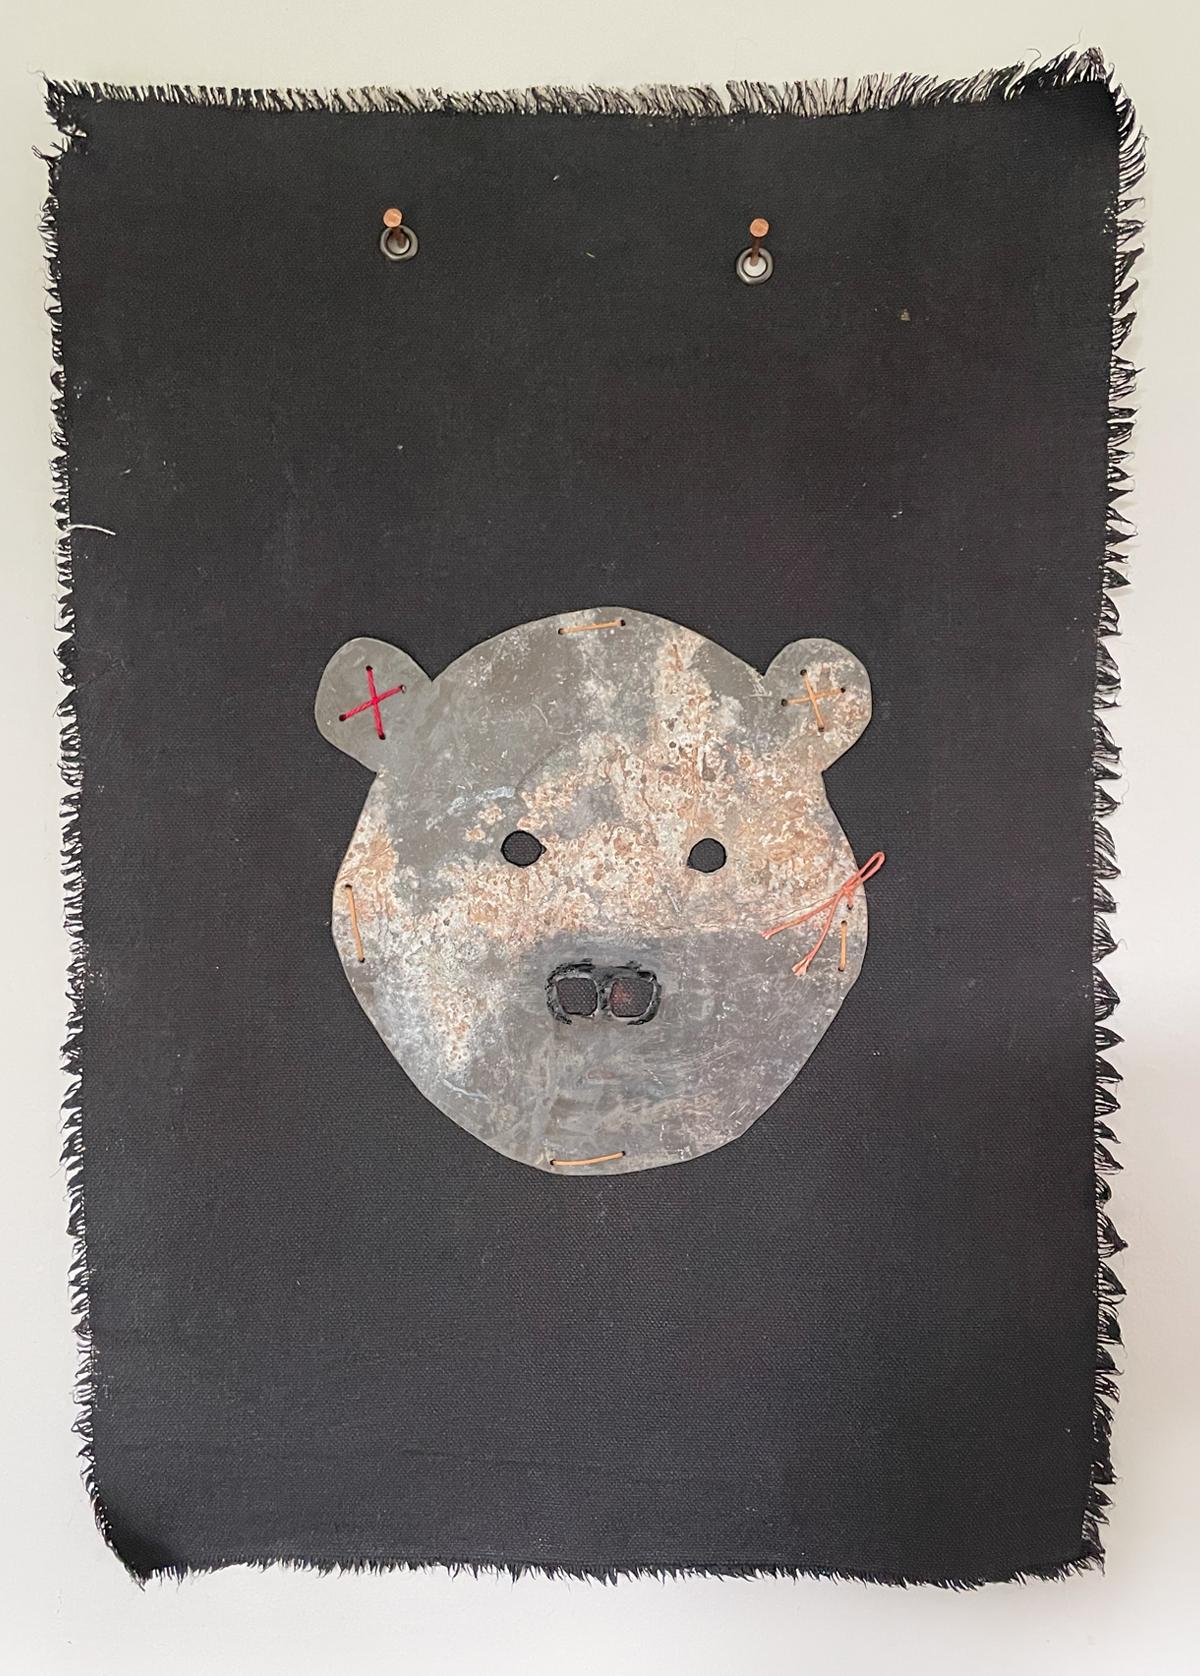 Fiber wall hanging: 'The Masks We Wear Series, Teddy' - Mixed Media Art by Gin Stone